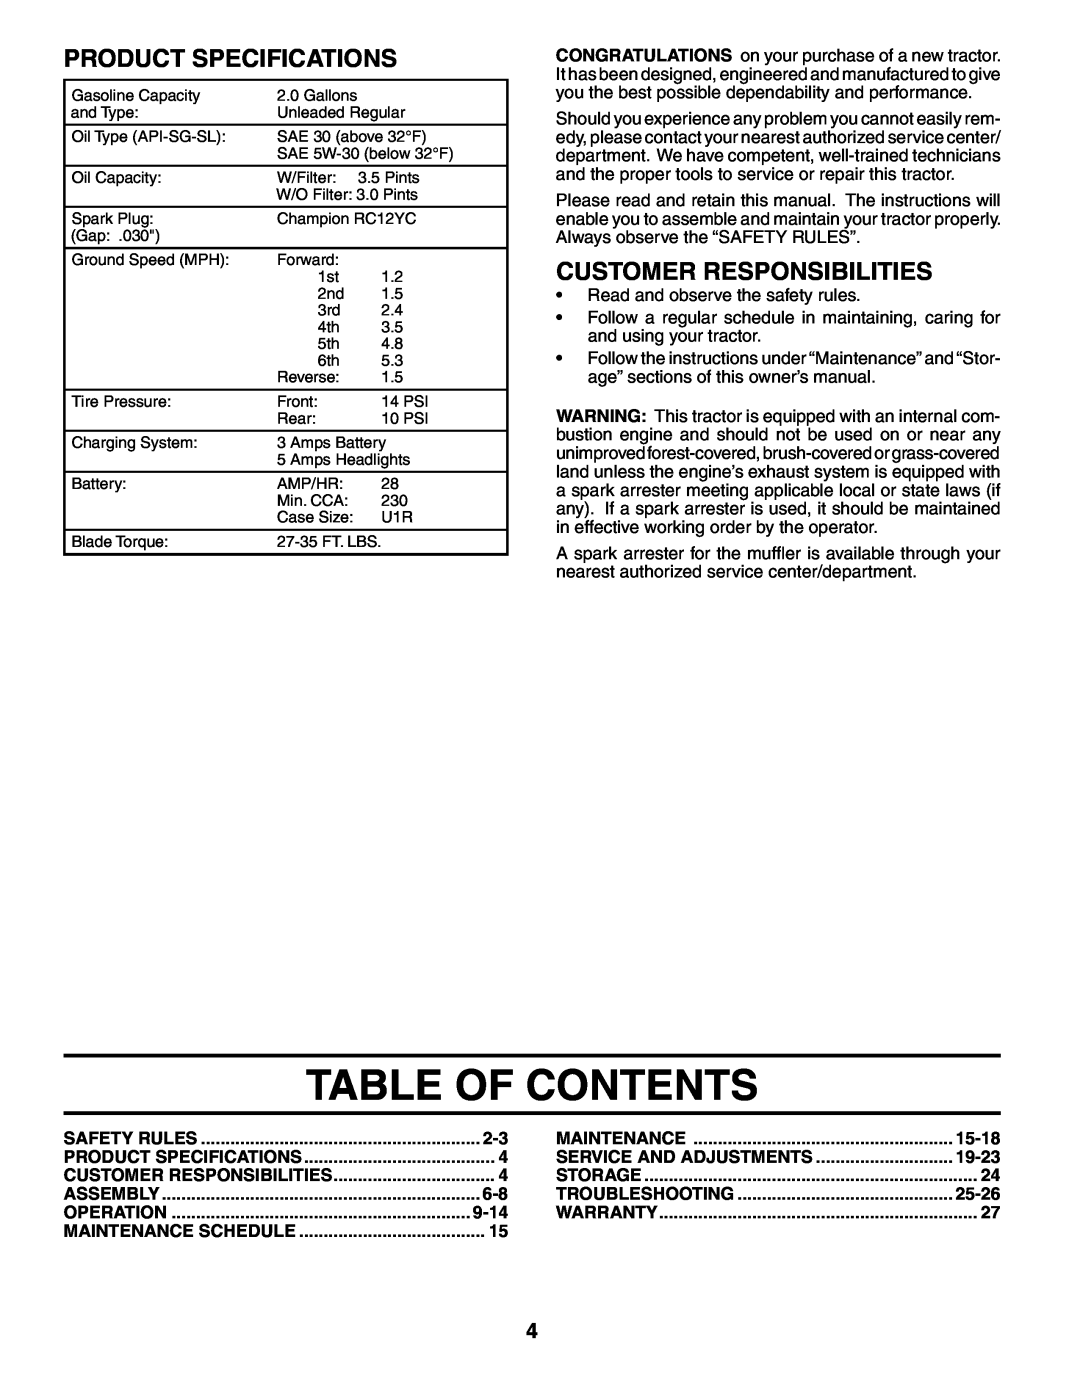 Poulan 96012004600, 401115 Table Of Contents, Product Specifications, Customer Responsibilities, 9-14, 15-18, 19-23, 25-26 